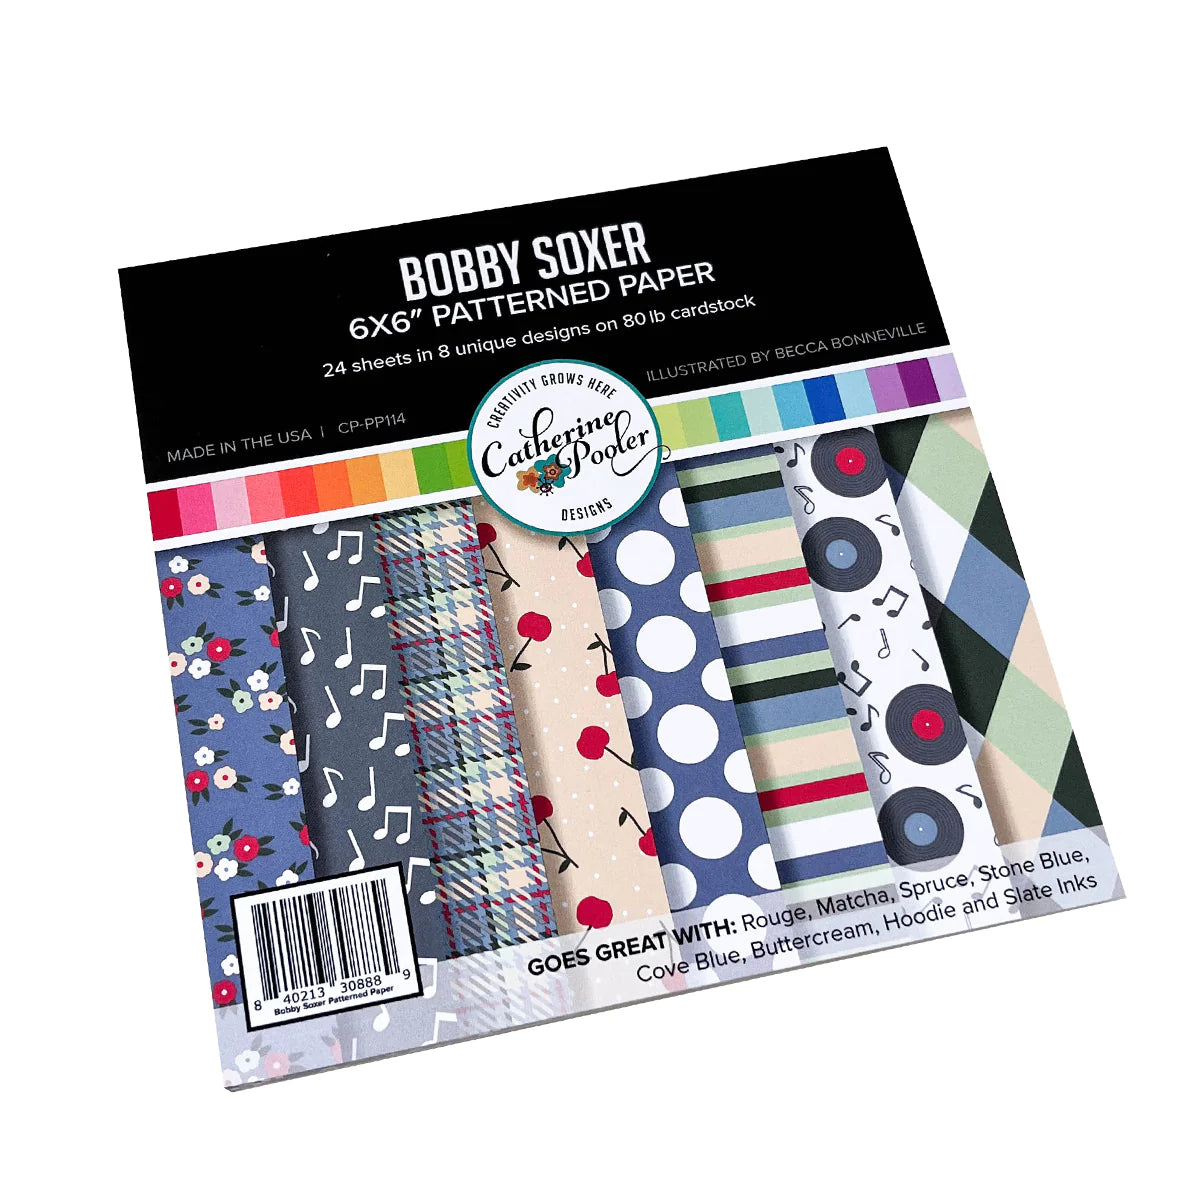 Bobby Soxer 6x6 Patterned Paper Pad